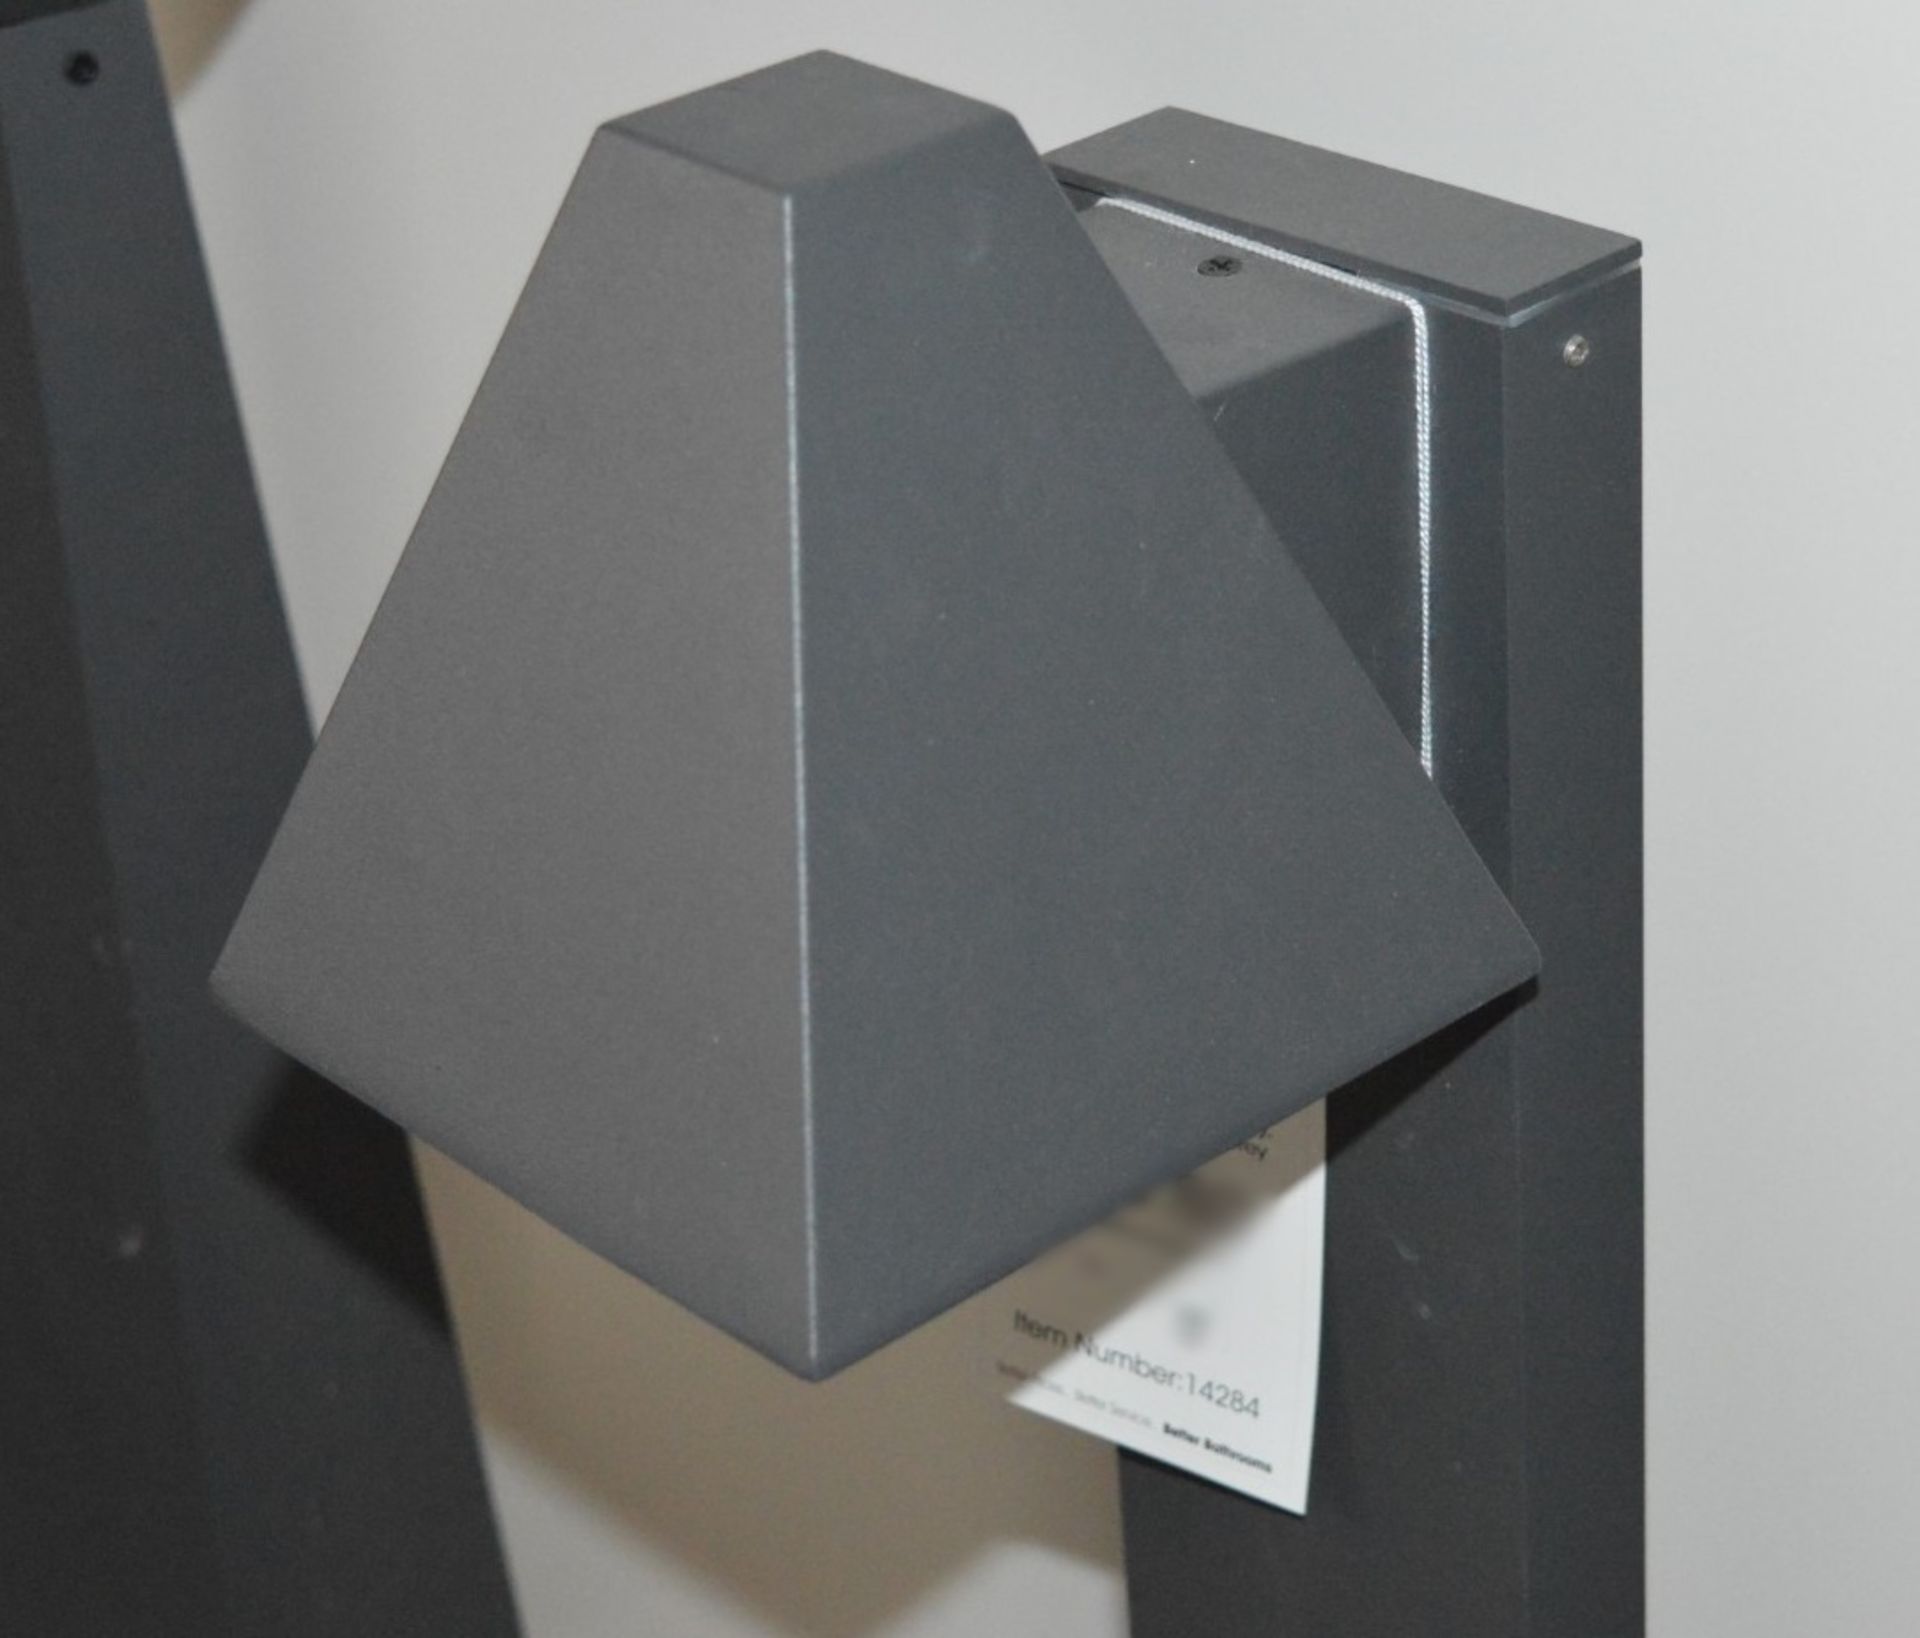 1 x 80cm Pyramid Outdoor Wall Light - Ex Display Stock - RRP £114.00 - Image 2 of 4